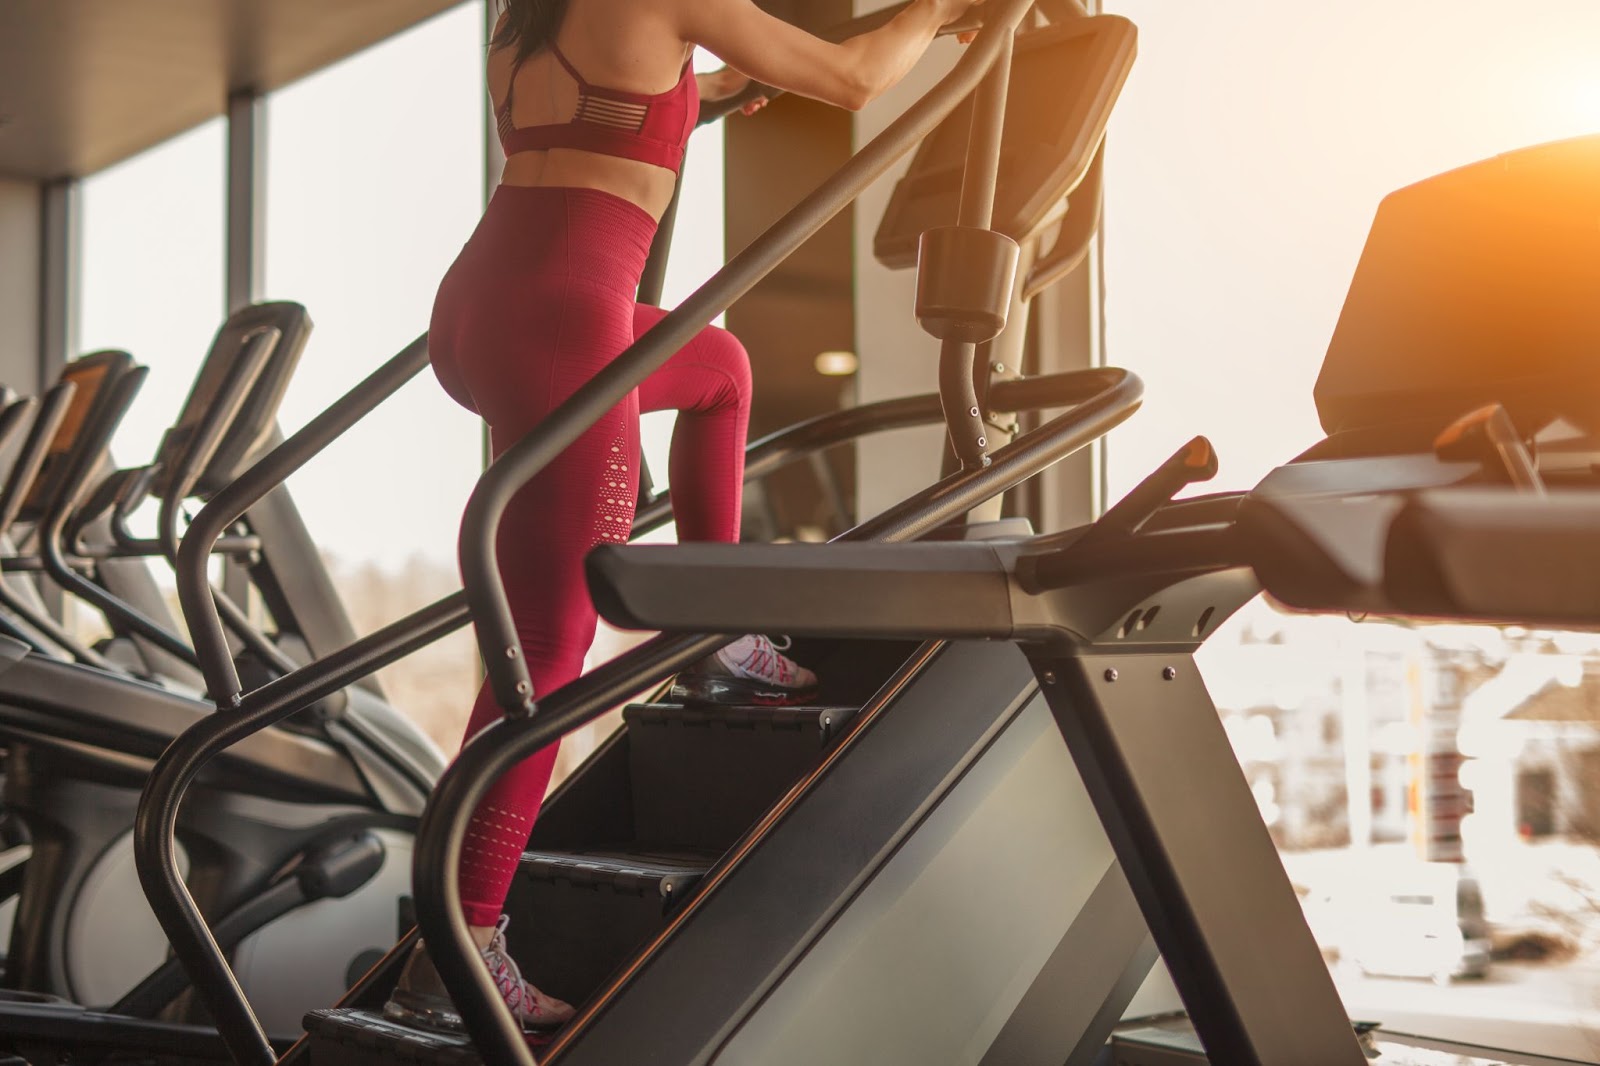 Woman in magenta workout clothes is working out on a stair stepper machine.